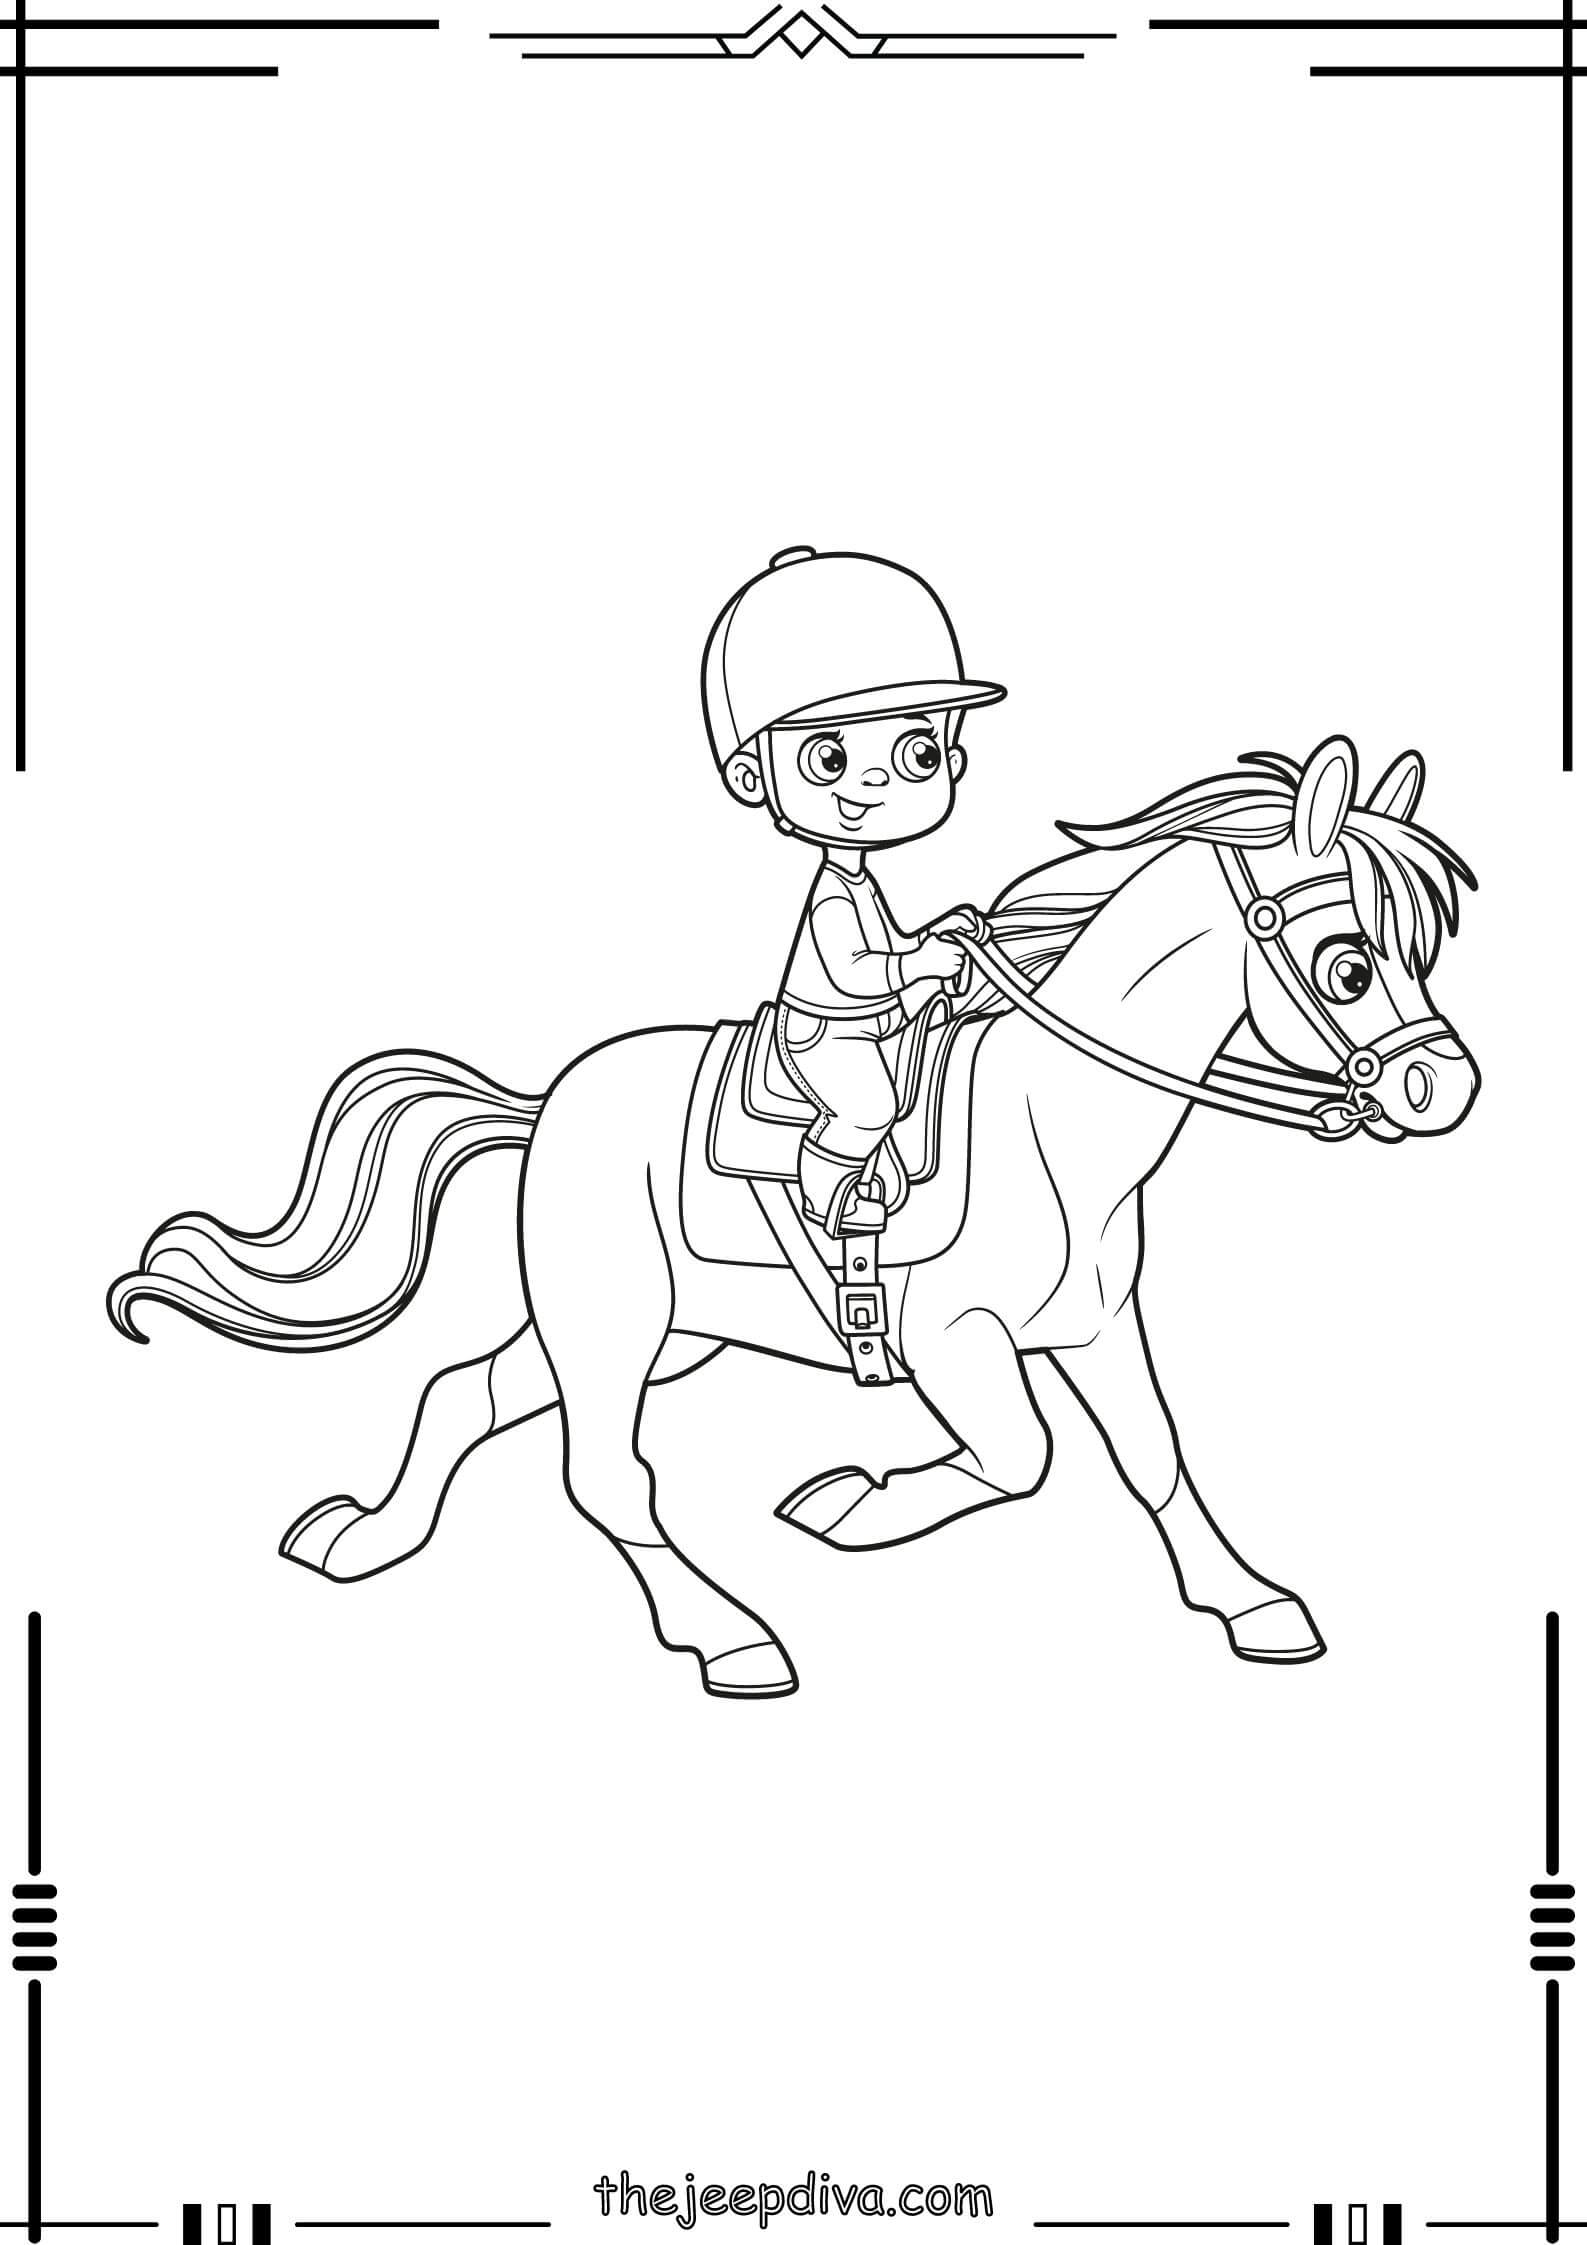 Horse-Colouring-Pages-Easy-20